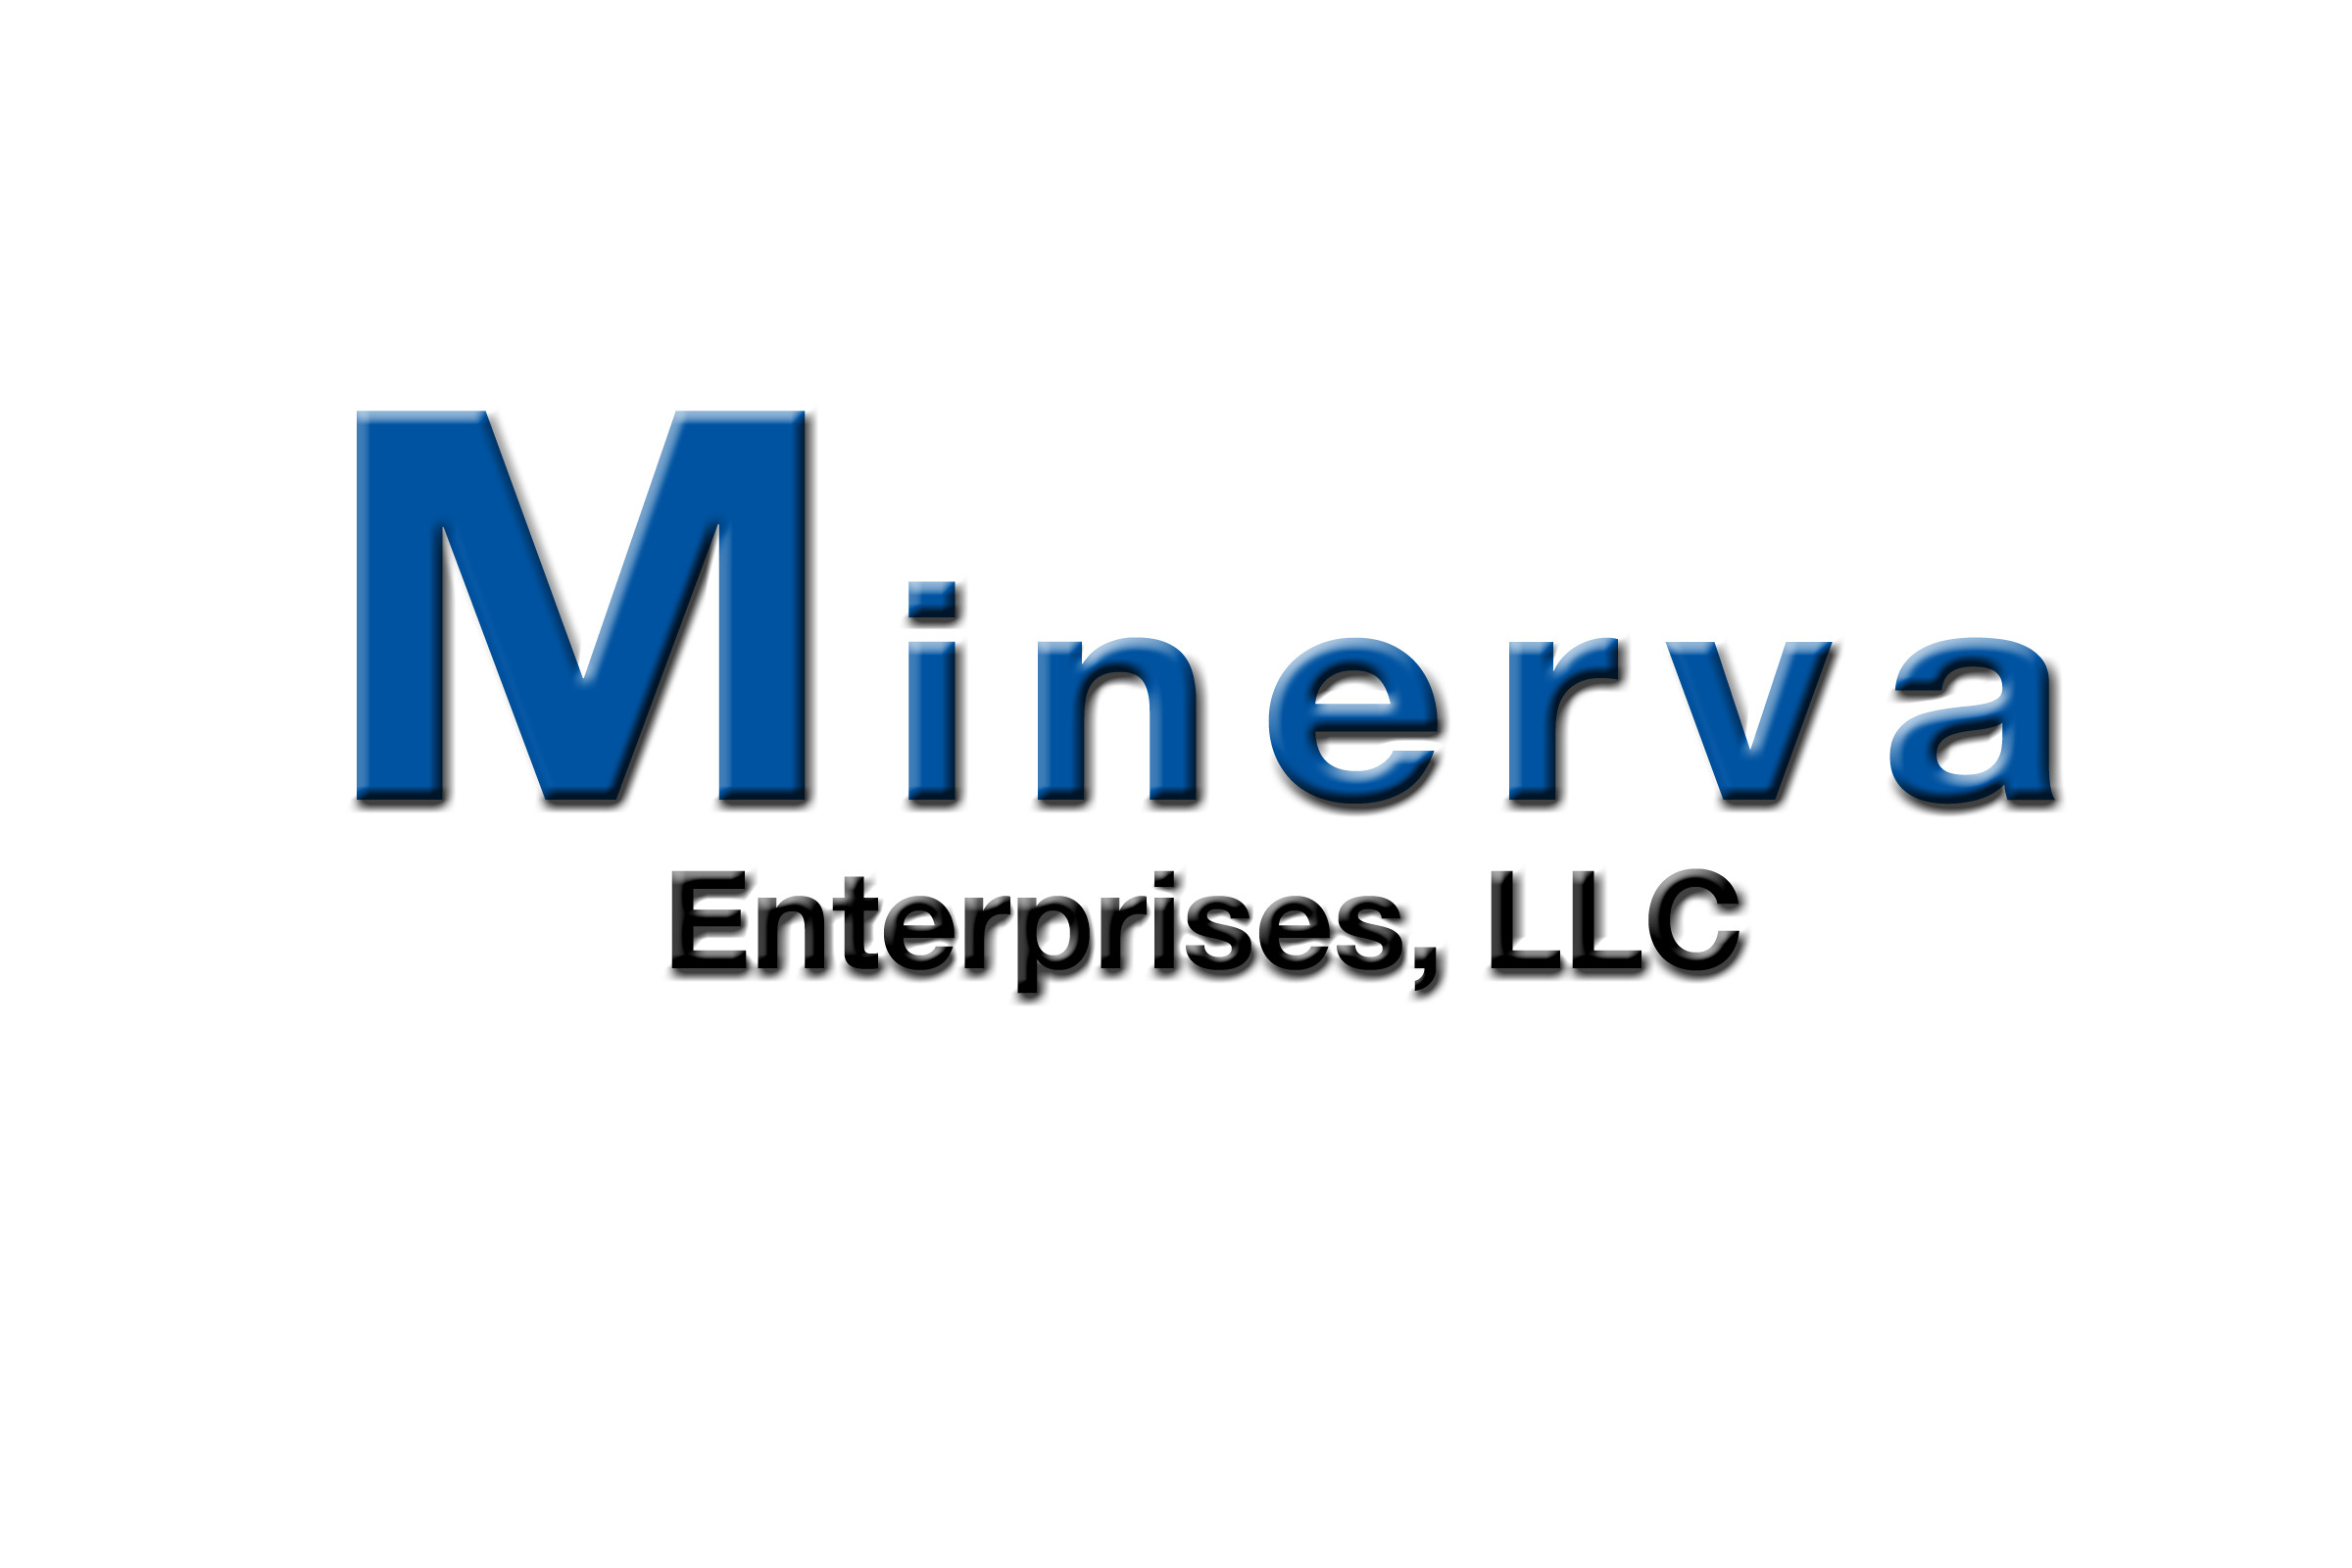 13 Facts About Minerva - Facts.net